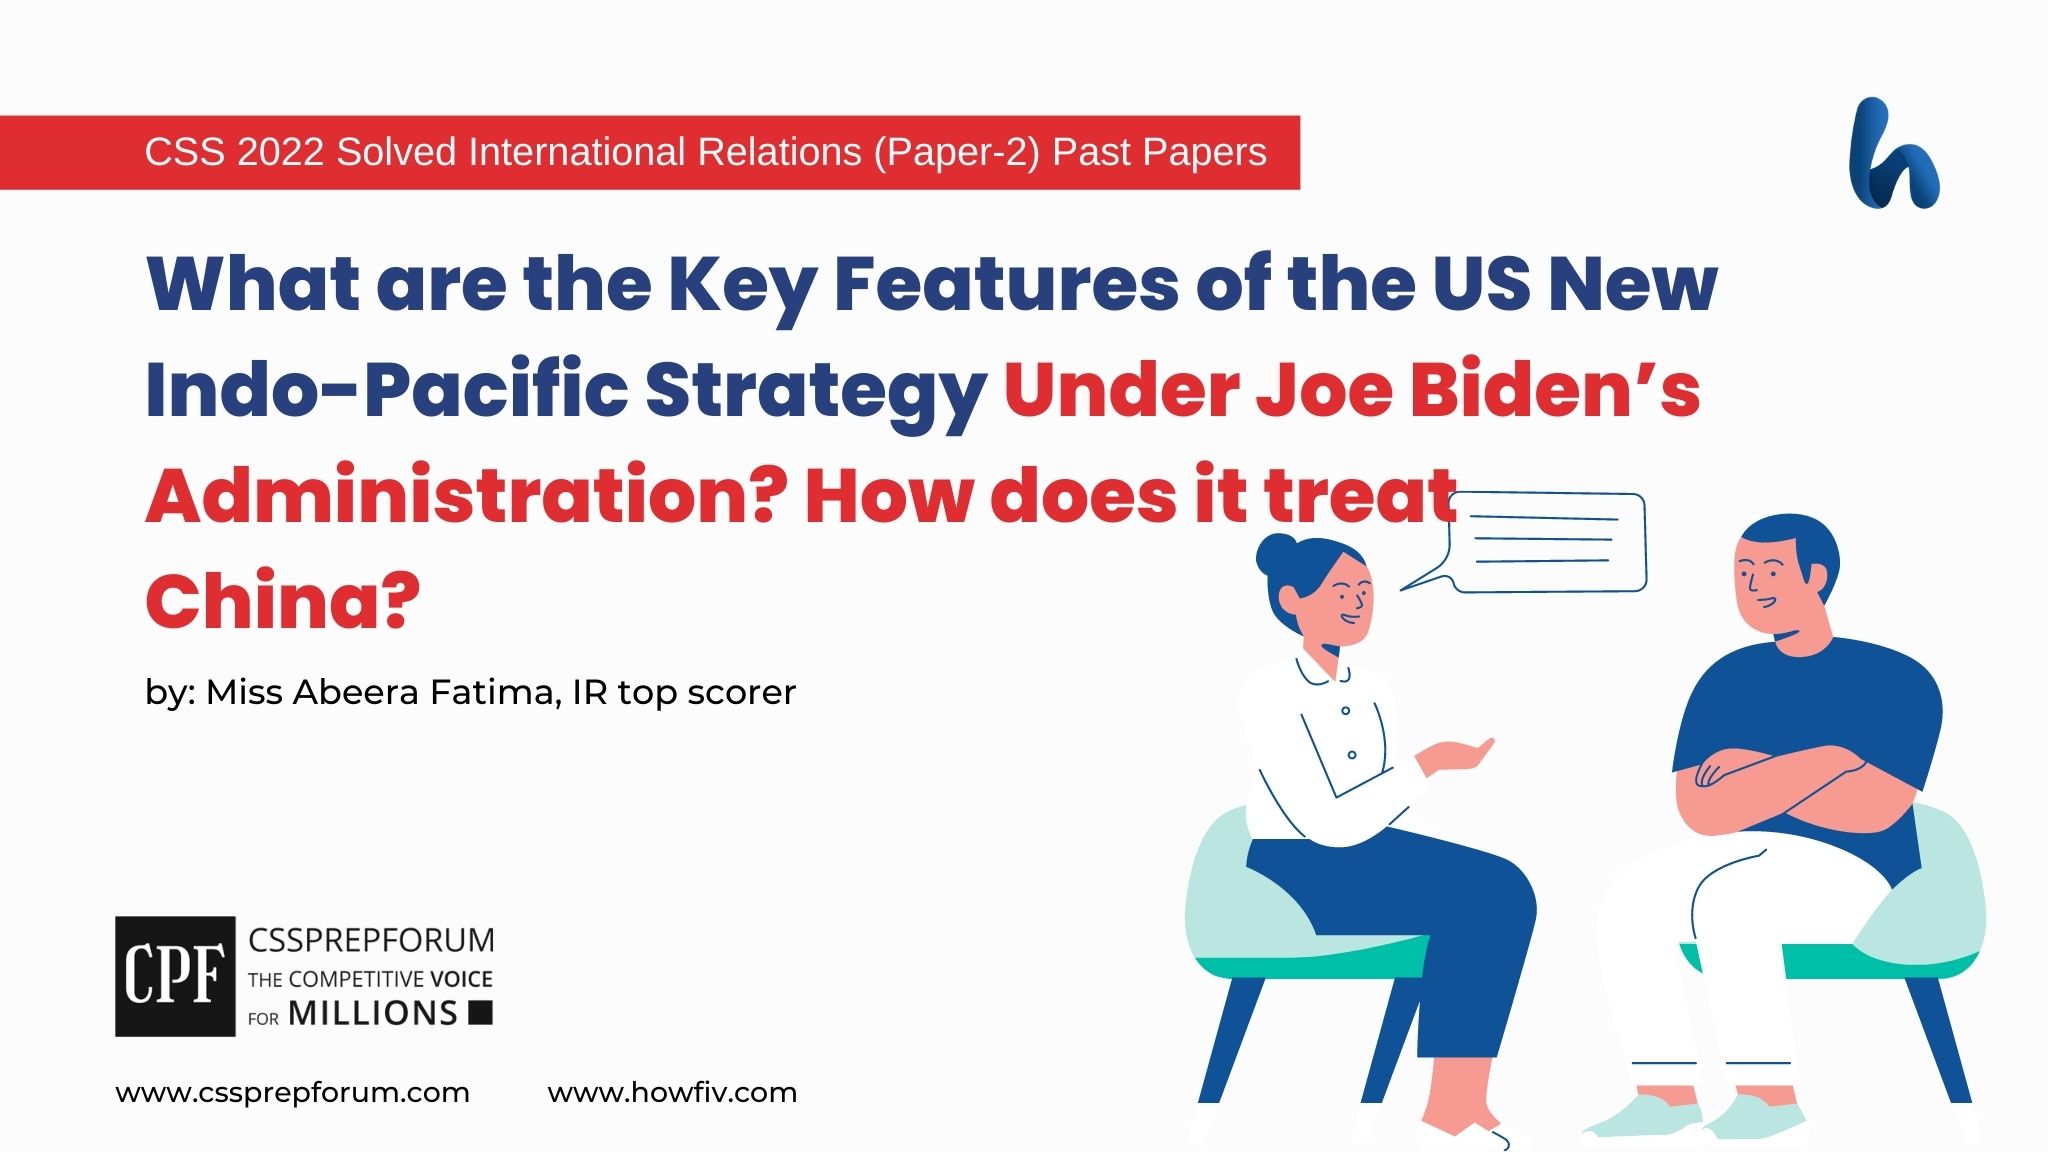 Q2. what are the key features of the us new indo-pacific strategy under joe biden’s administration? how does it treat china?